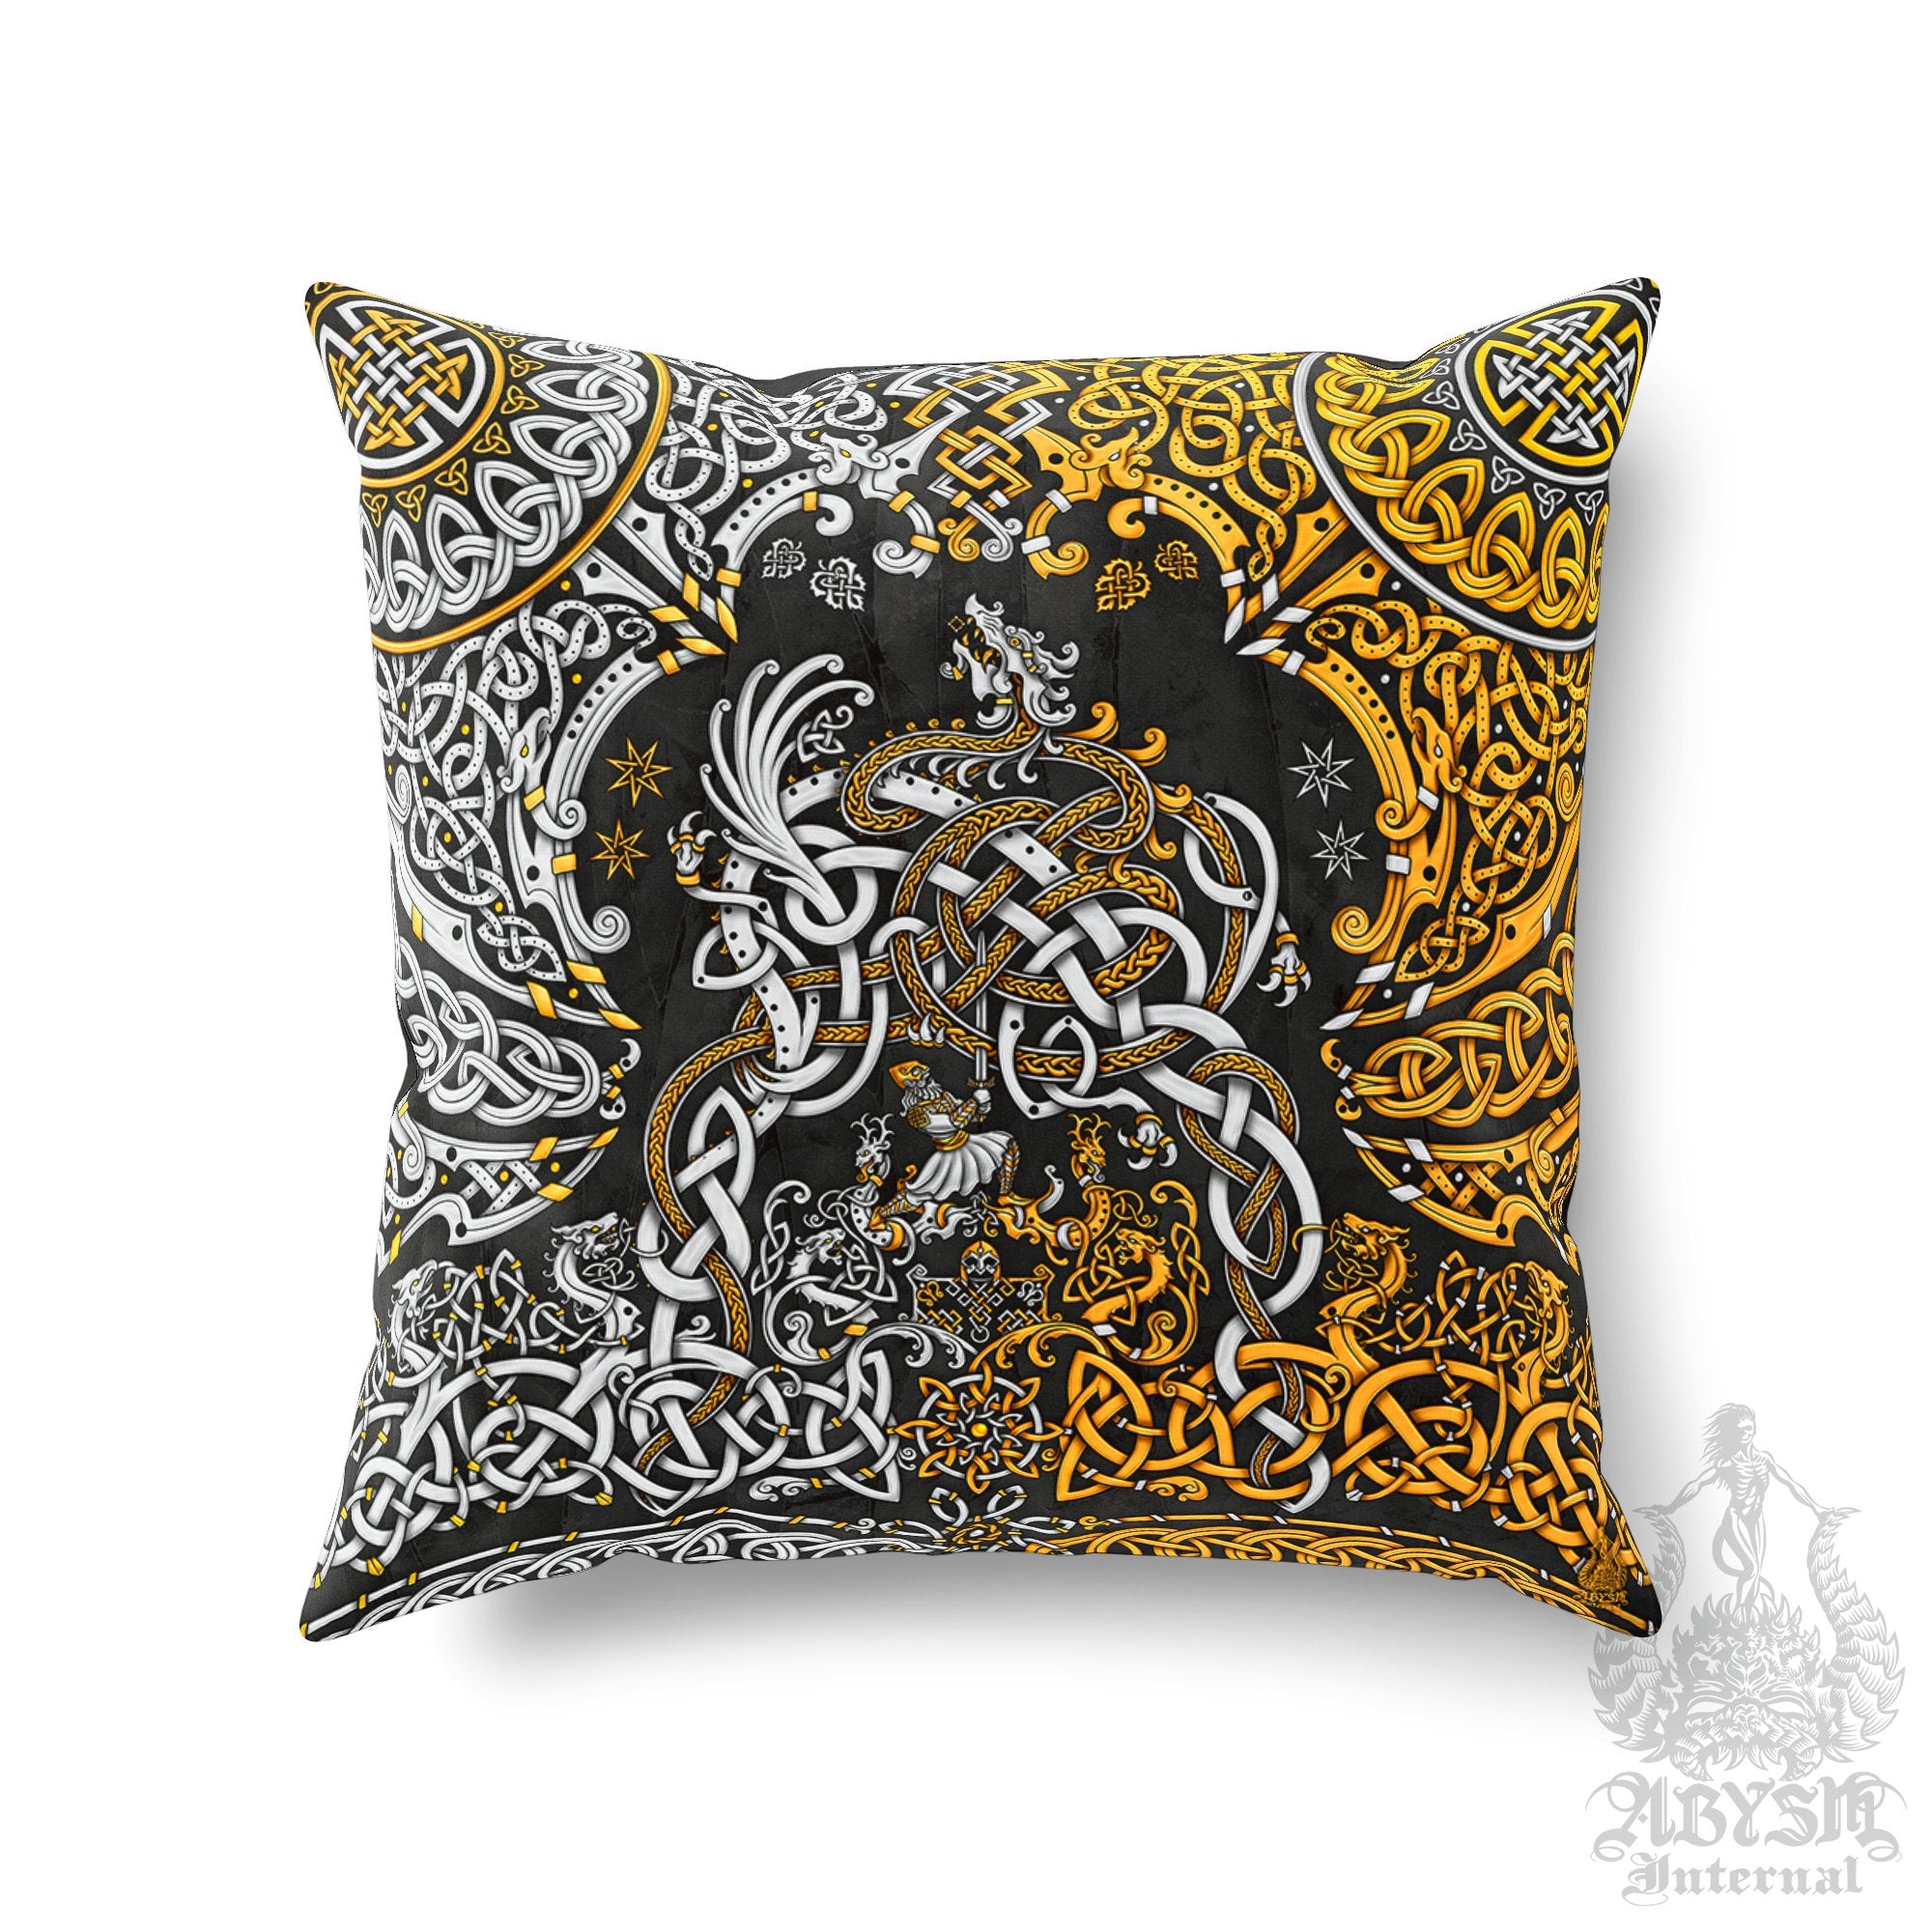 Norse Throw Pillow, Decorative Accent Pillow, Square Cushion Cover, Viking Room Decor, Dragon Fafnir, Nordic Art, Alternative Home - Gold & 3 Colors - Abysm Internal